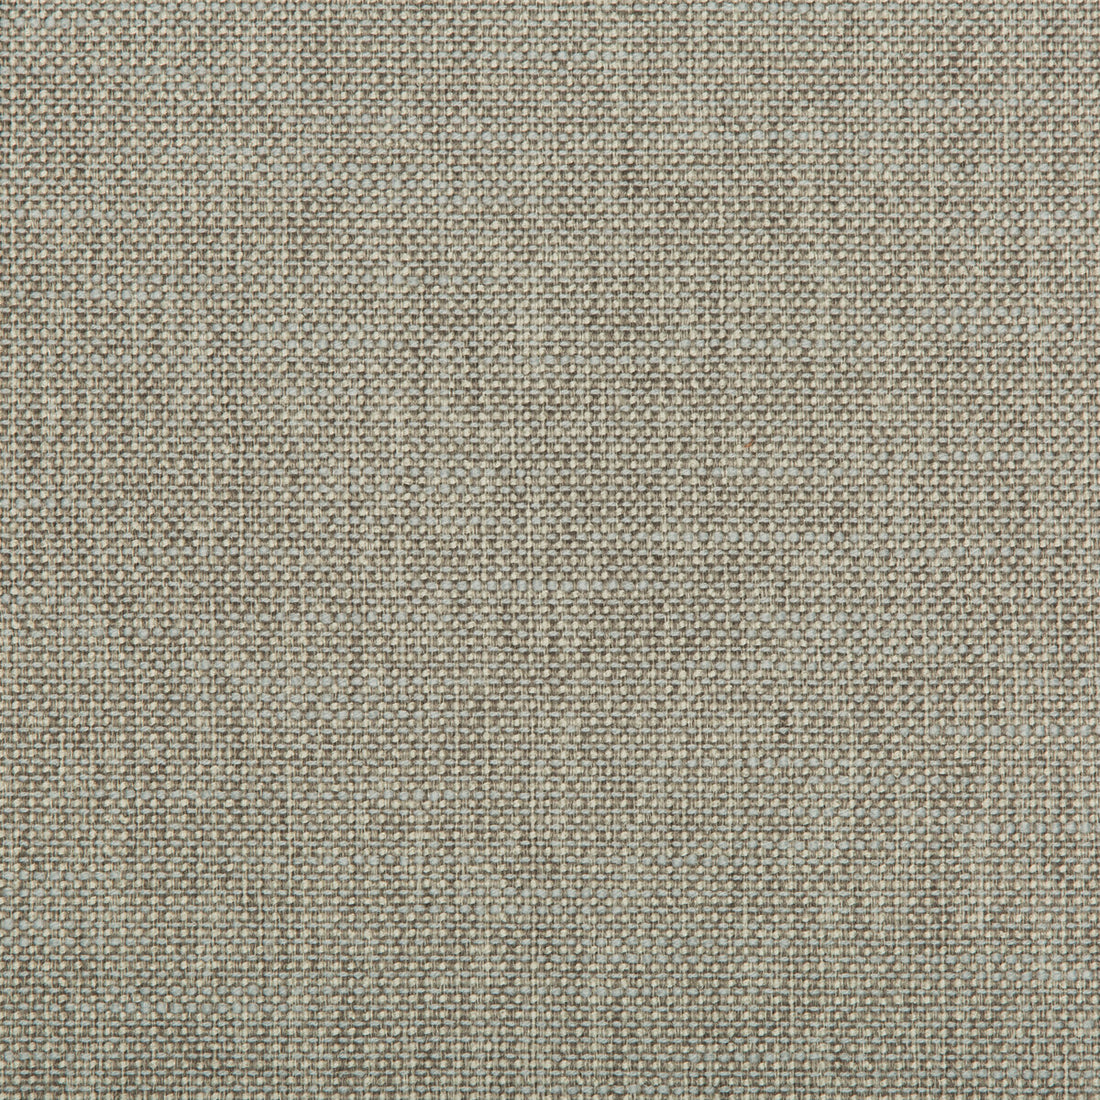 Heyward fabric in haze color - pattern 35746.1511.0 - by Kravet Contract in the Value Kravetarmor collection